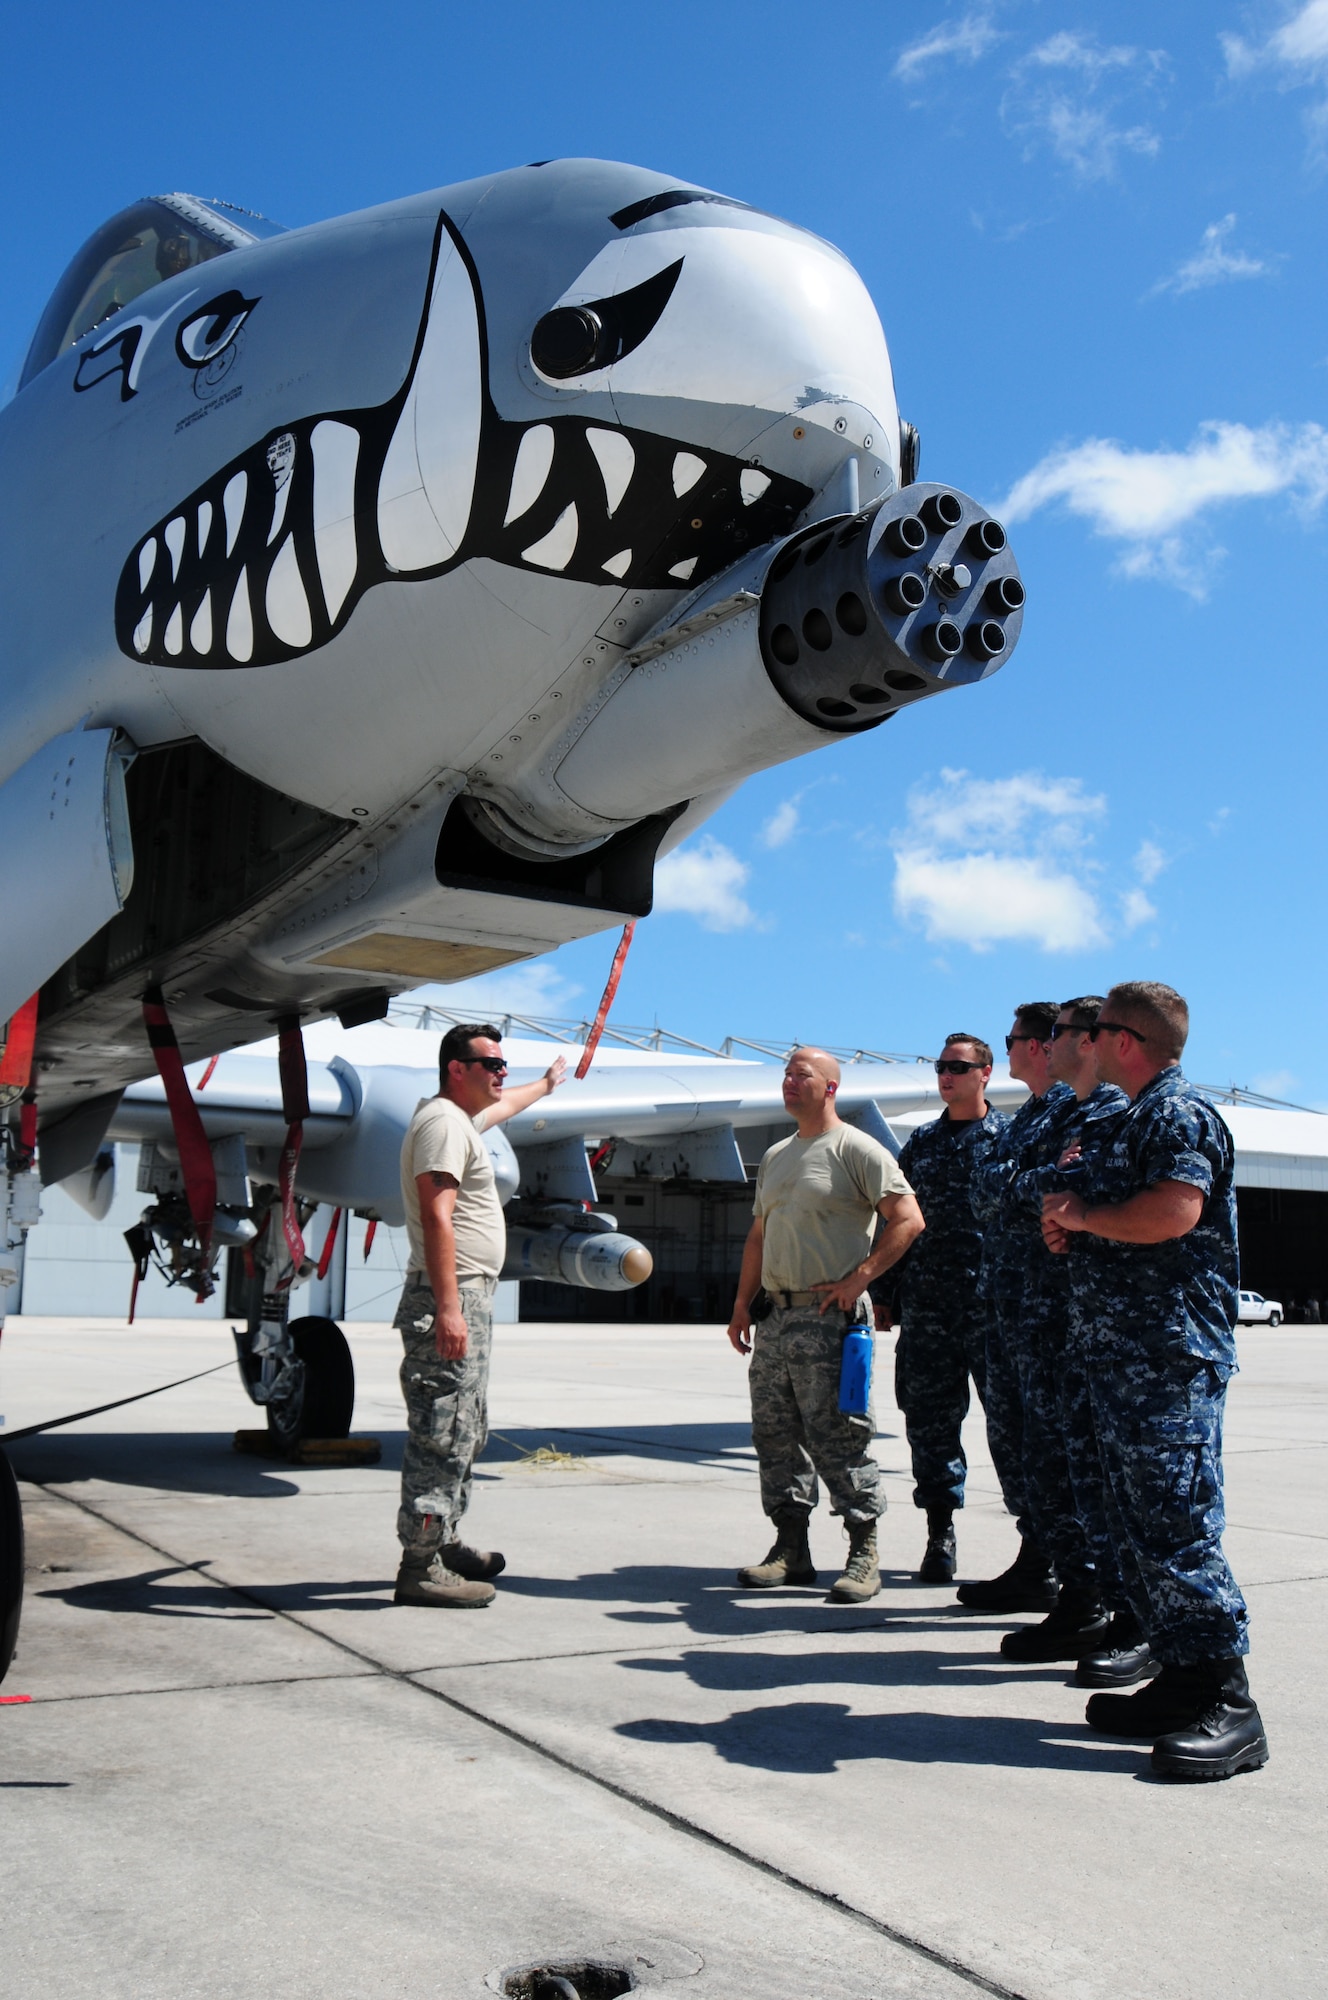 U.S. Air Force Senior Airman Matt Lowe, 924th Maintenance Squadron crew chief, and Master Sgt. James Pumarajo, 924th MXS munitions flight chief, show and discuss the weapons capabilities of the A-10 Thunderbolt II with aviation ordnancemen from the Naval Munitions Command on the flightline at Naval Air Station Key West, Florida during the 924th Fighter Group’s annual training, July 18. The service members also describe the differences between their career fields within their specific branches. (U.S. Air Force photo by Tech. Sgt. Courtney Richardson)